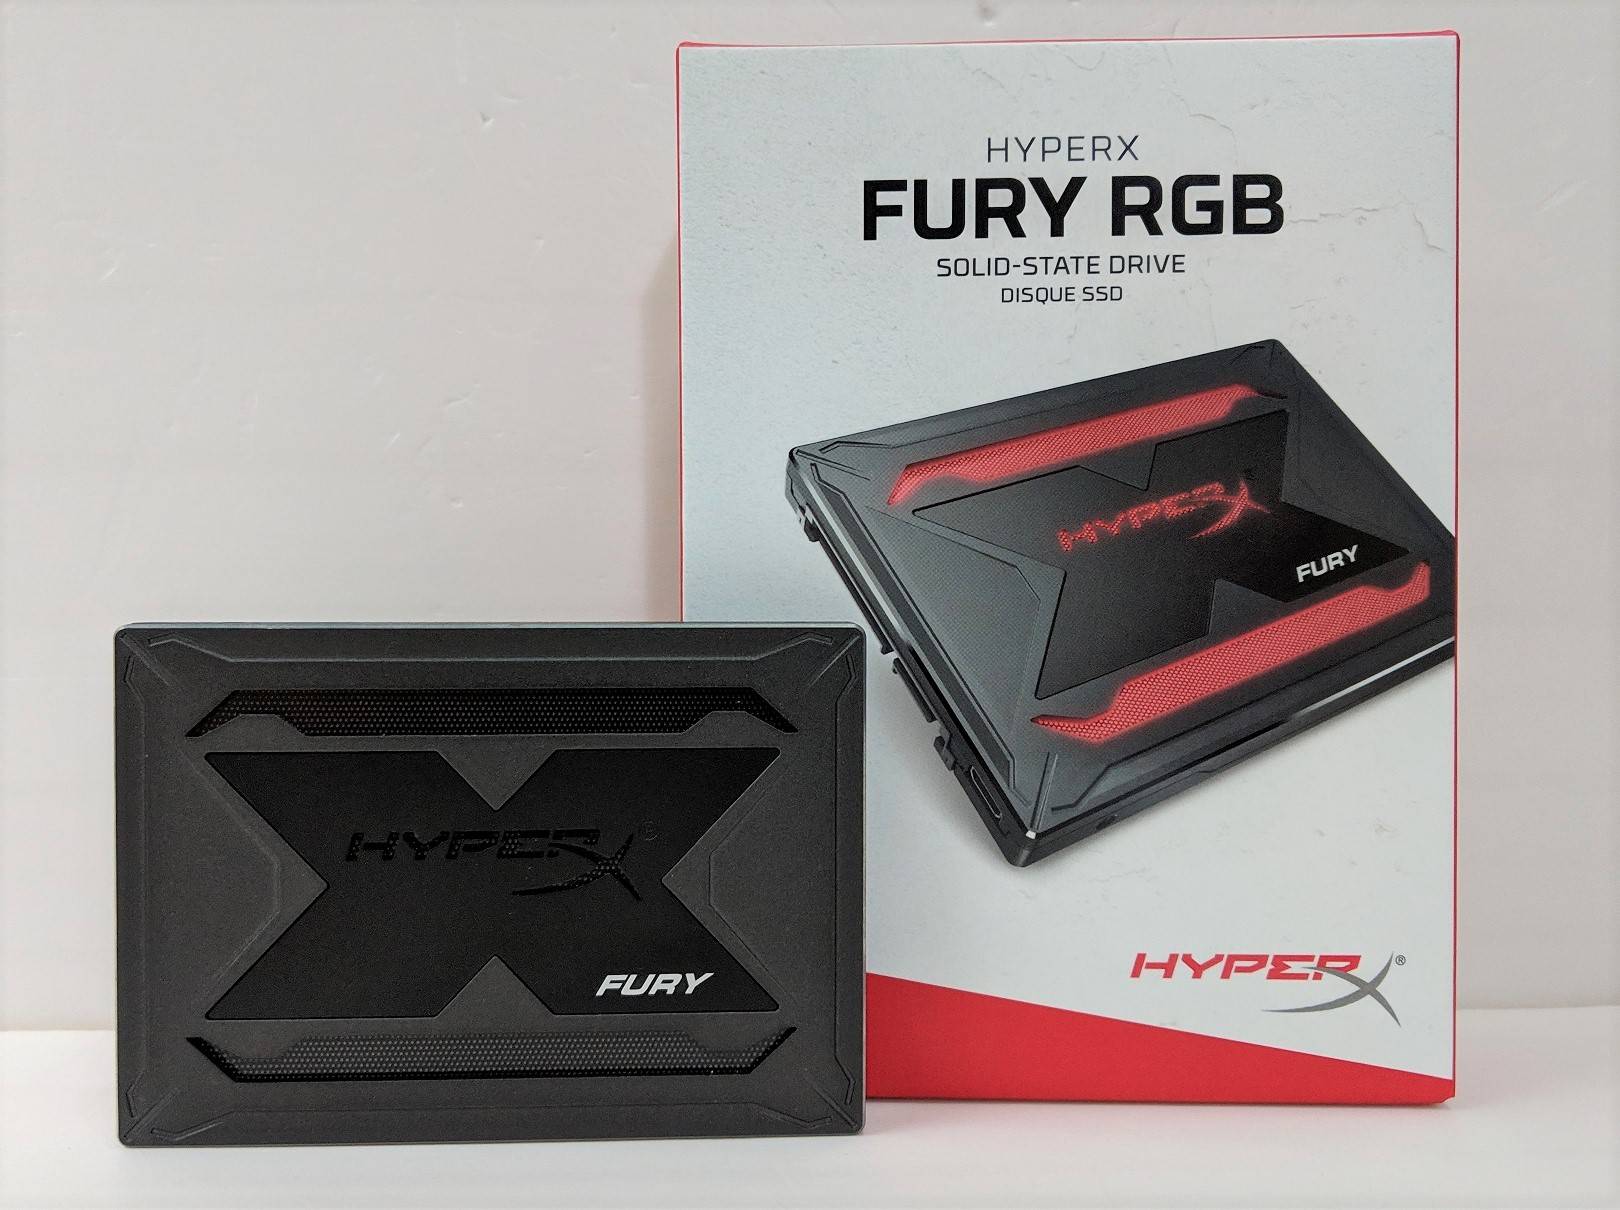 Extraction Surprised Five Unboxing and Review of HyperX FURY RGB 480GB SATA SSD | UnbxTech